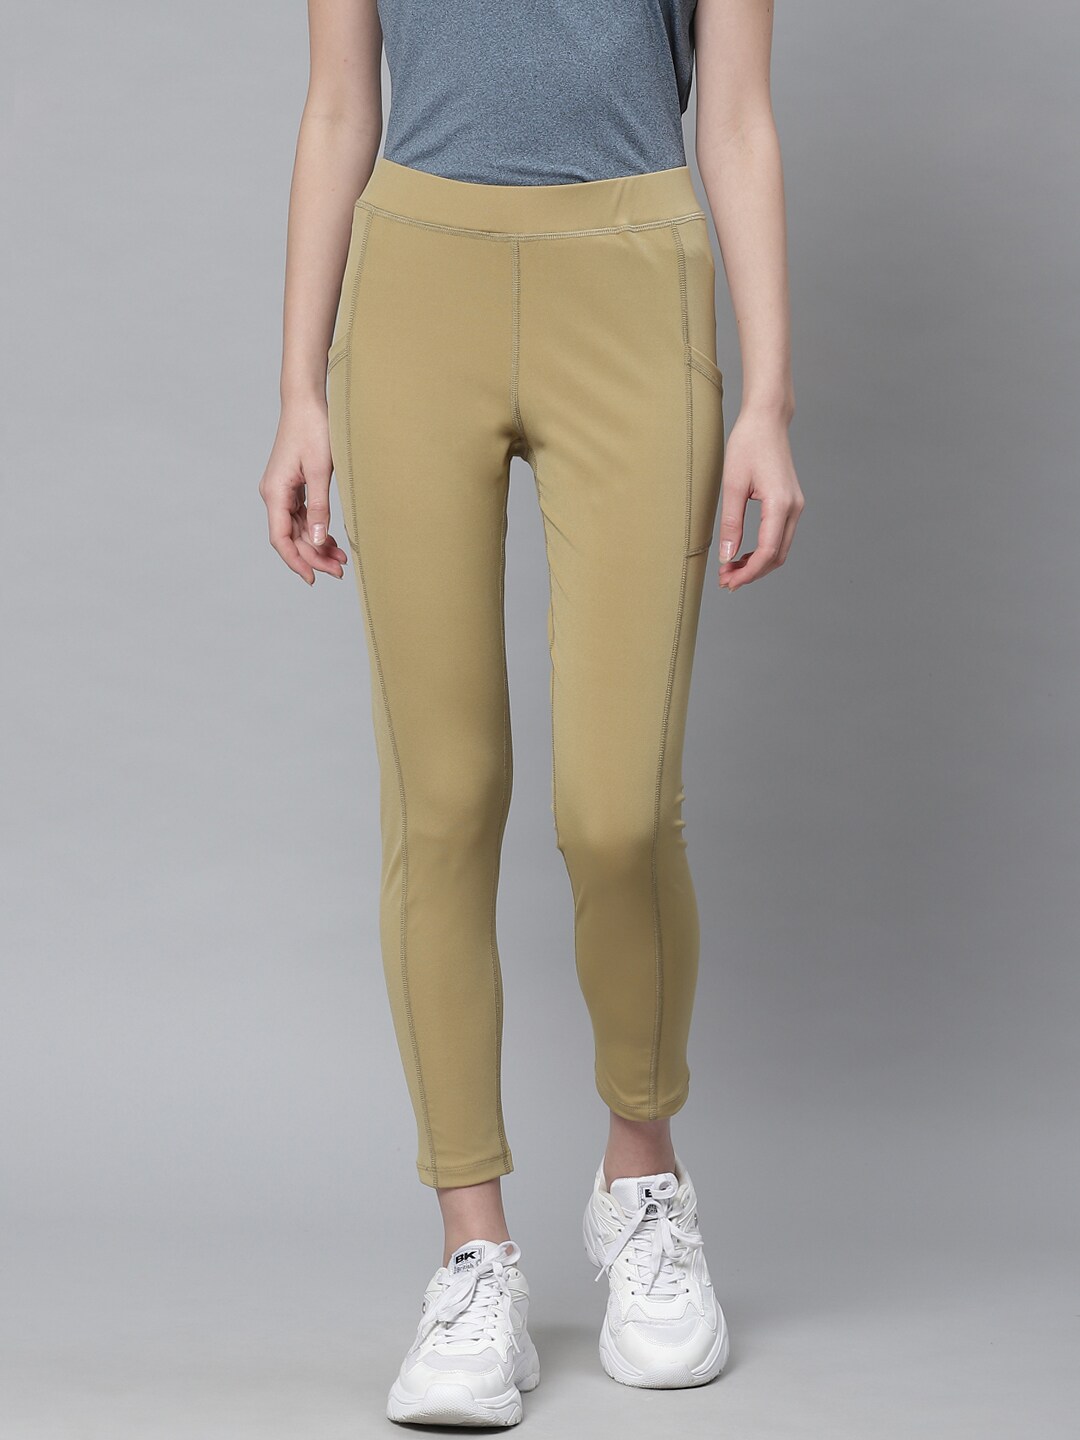 Chkokko Women Beige Solid Cropped Yoga Tights Price in India